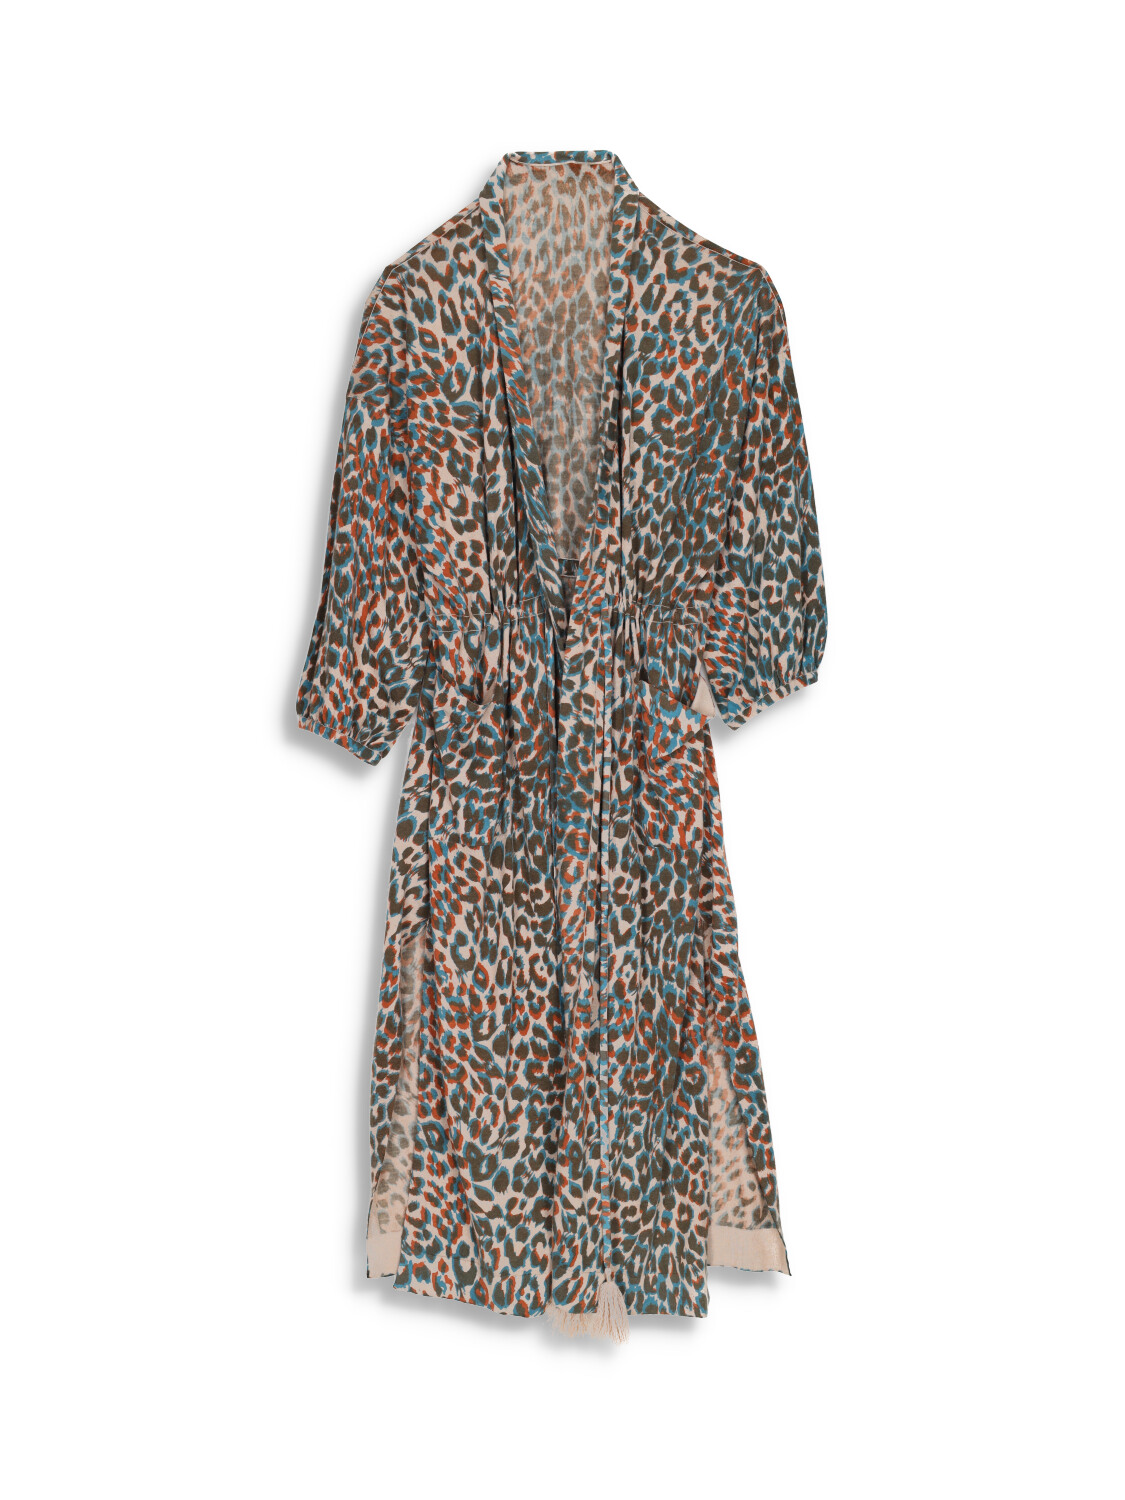 Coat Bola Cheetah - Long knitted coat with print design in silk-cashmere blend